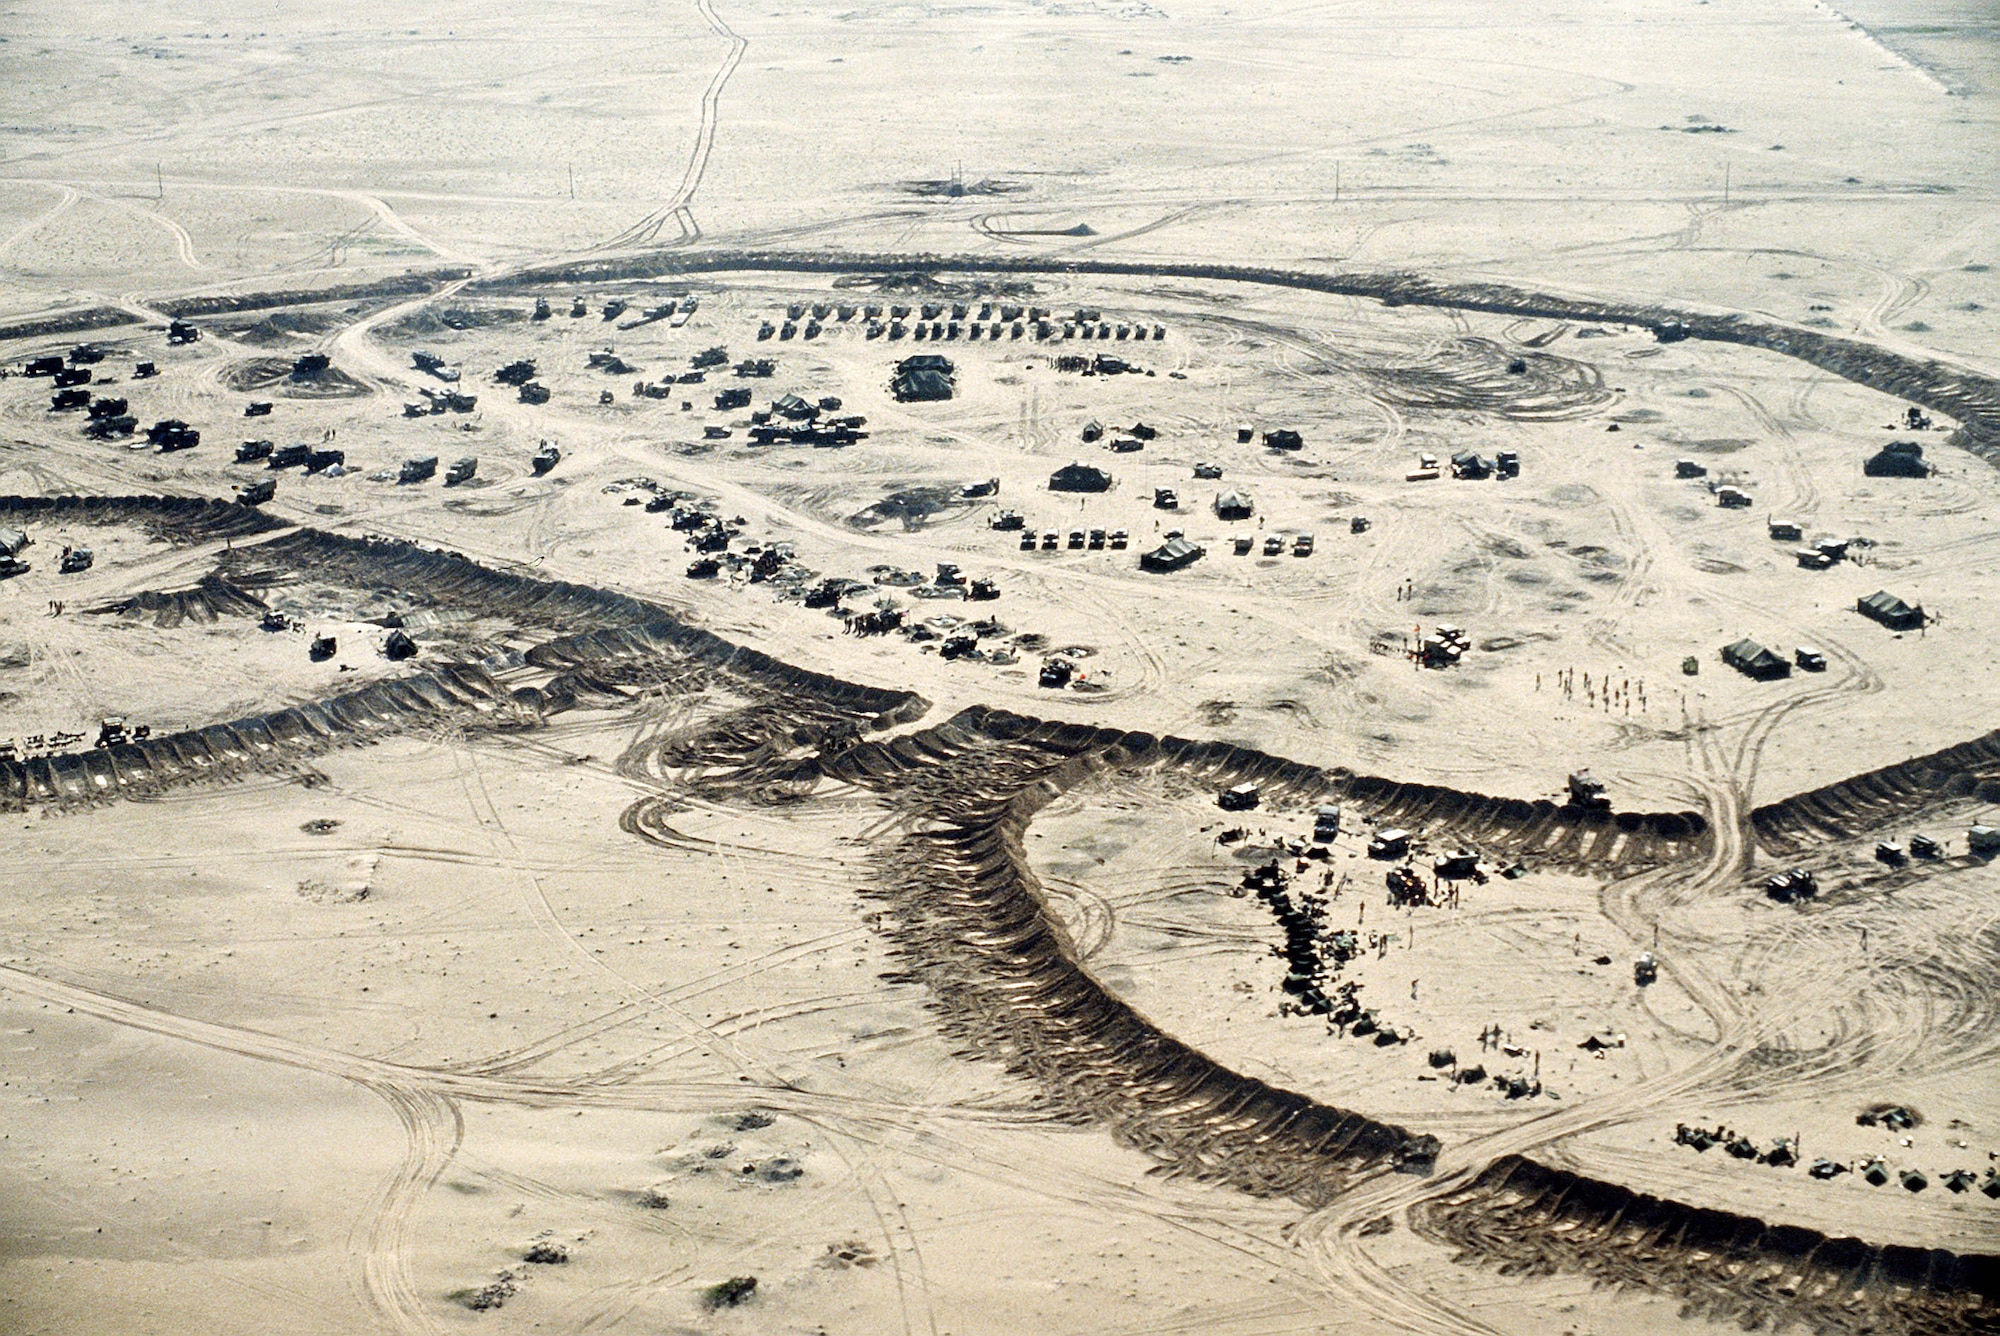 A U.S. military bare base in the Persian Gulf.  Engineers were able to build literal cities in the sand to serve as platforms for U.S weapons systems. (Courtesy photo)